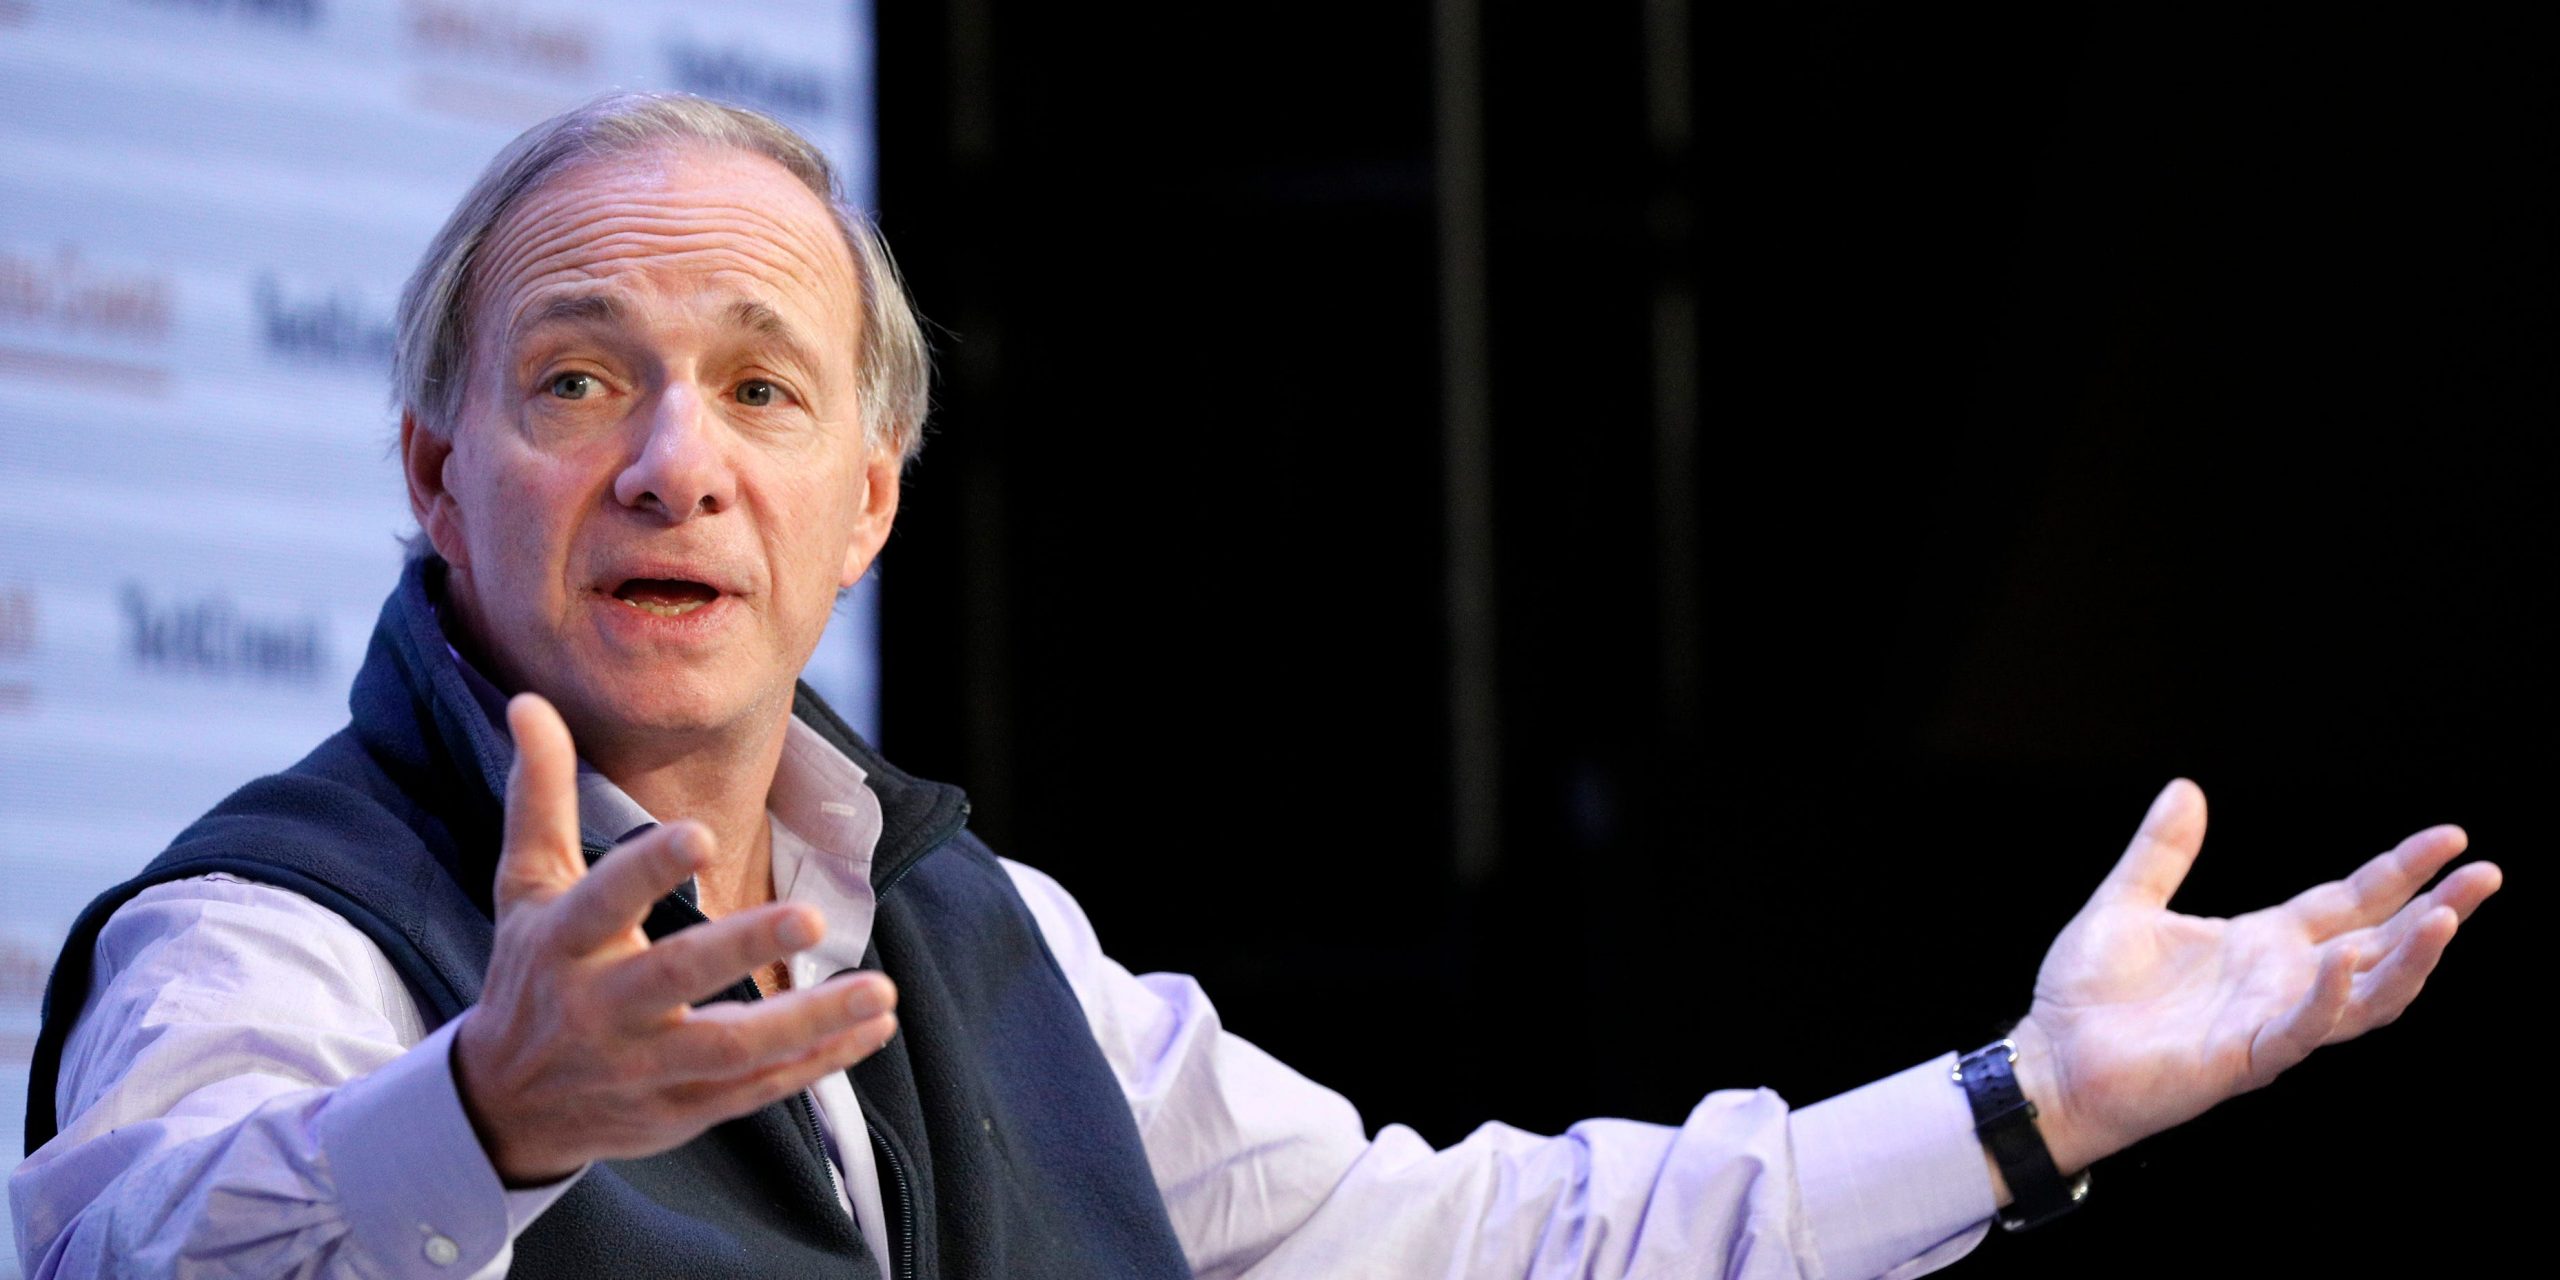 Bridgewater Associates Founder & Co-Chairman/Co-CIO Ray Dalio speaks onstage during TechCrunch Disrupt San Francisco 2019 at Moscone Convention Center on October 02, 2019 in San Francisco, California.